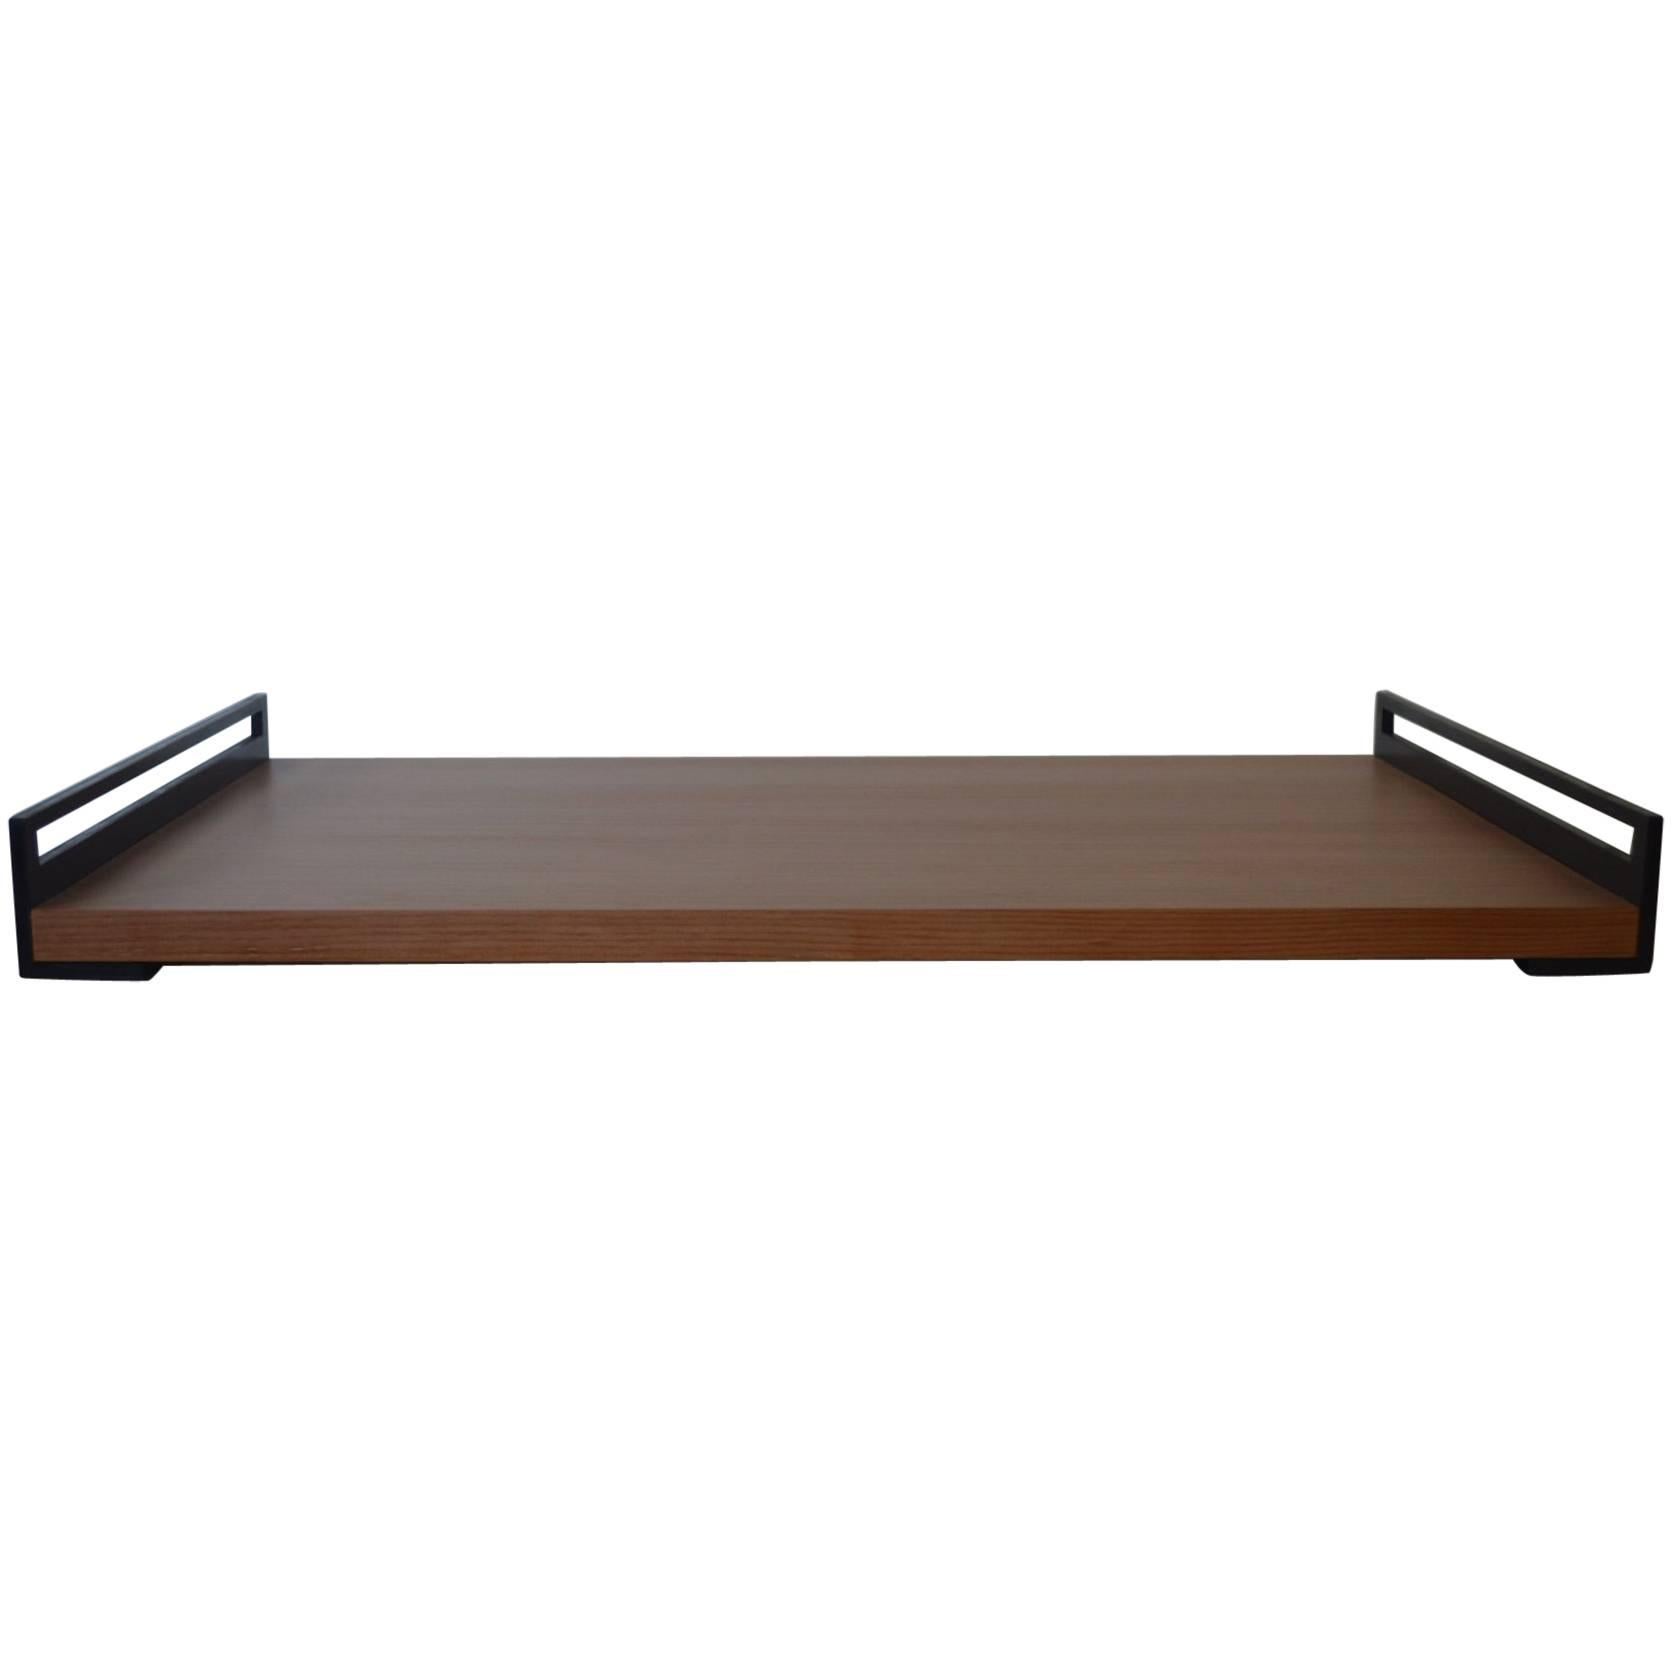 Contemporary Minimalist Blackened Steel and Wood Service Tray by Scott Gordon For Sale